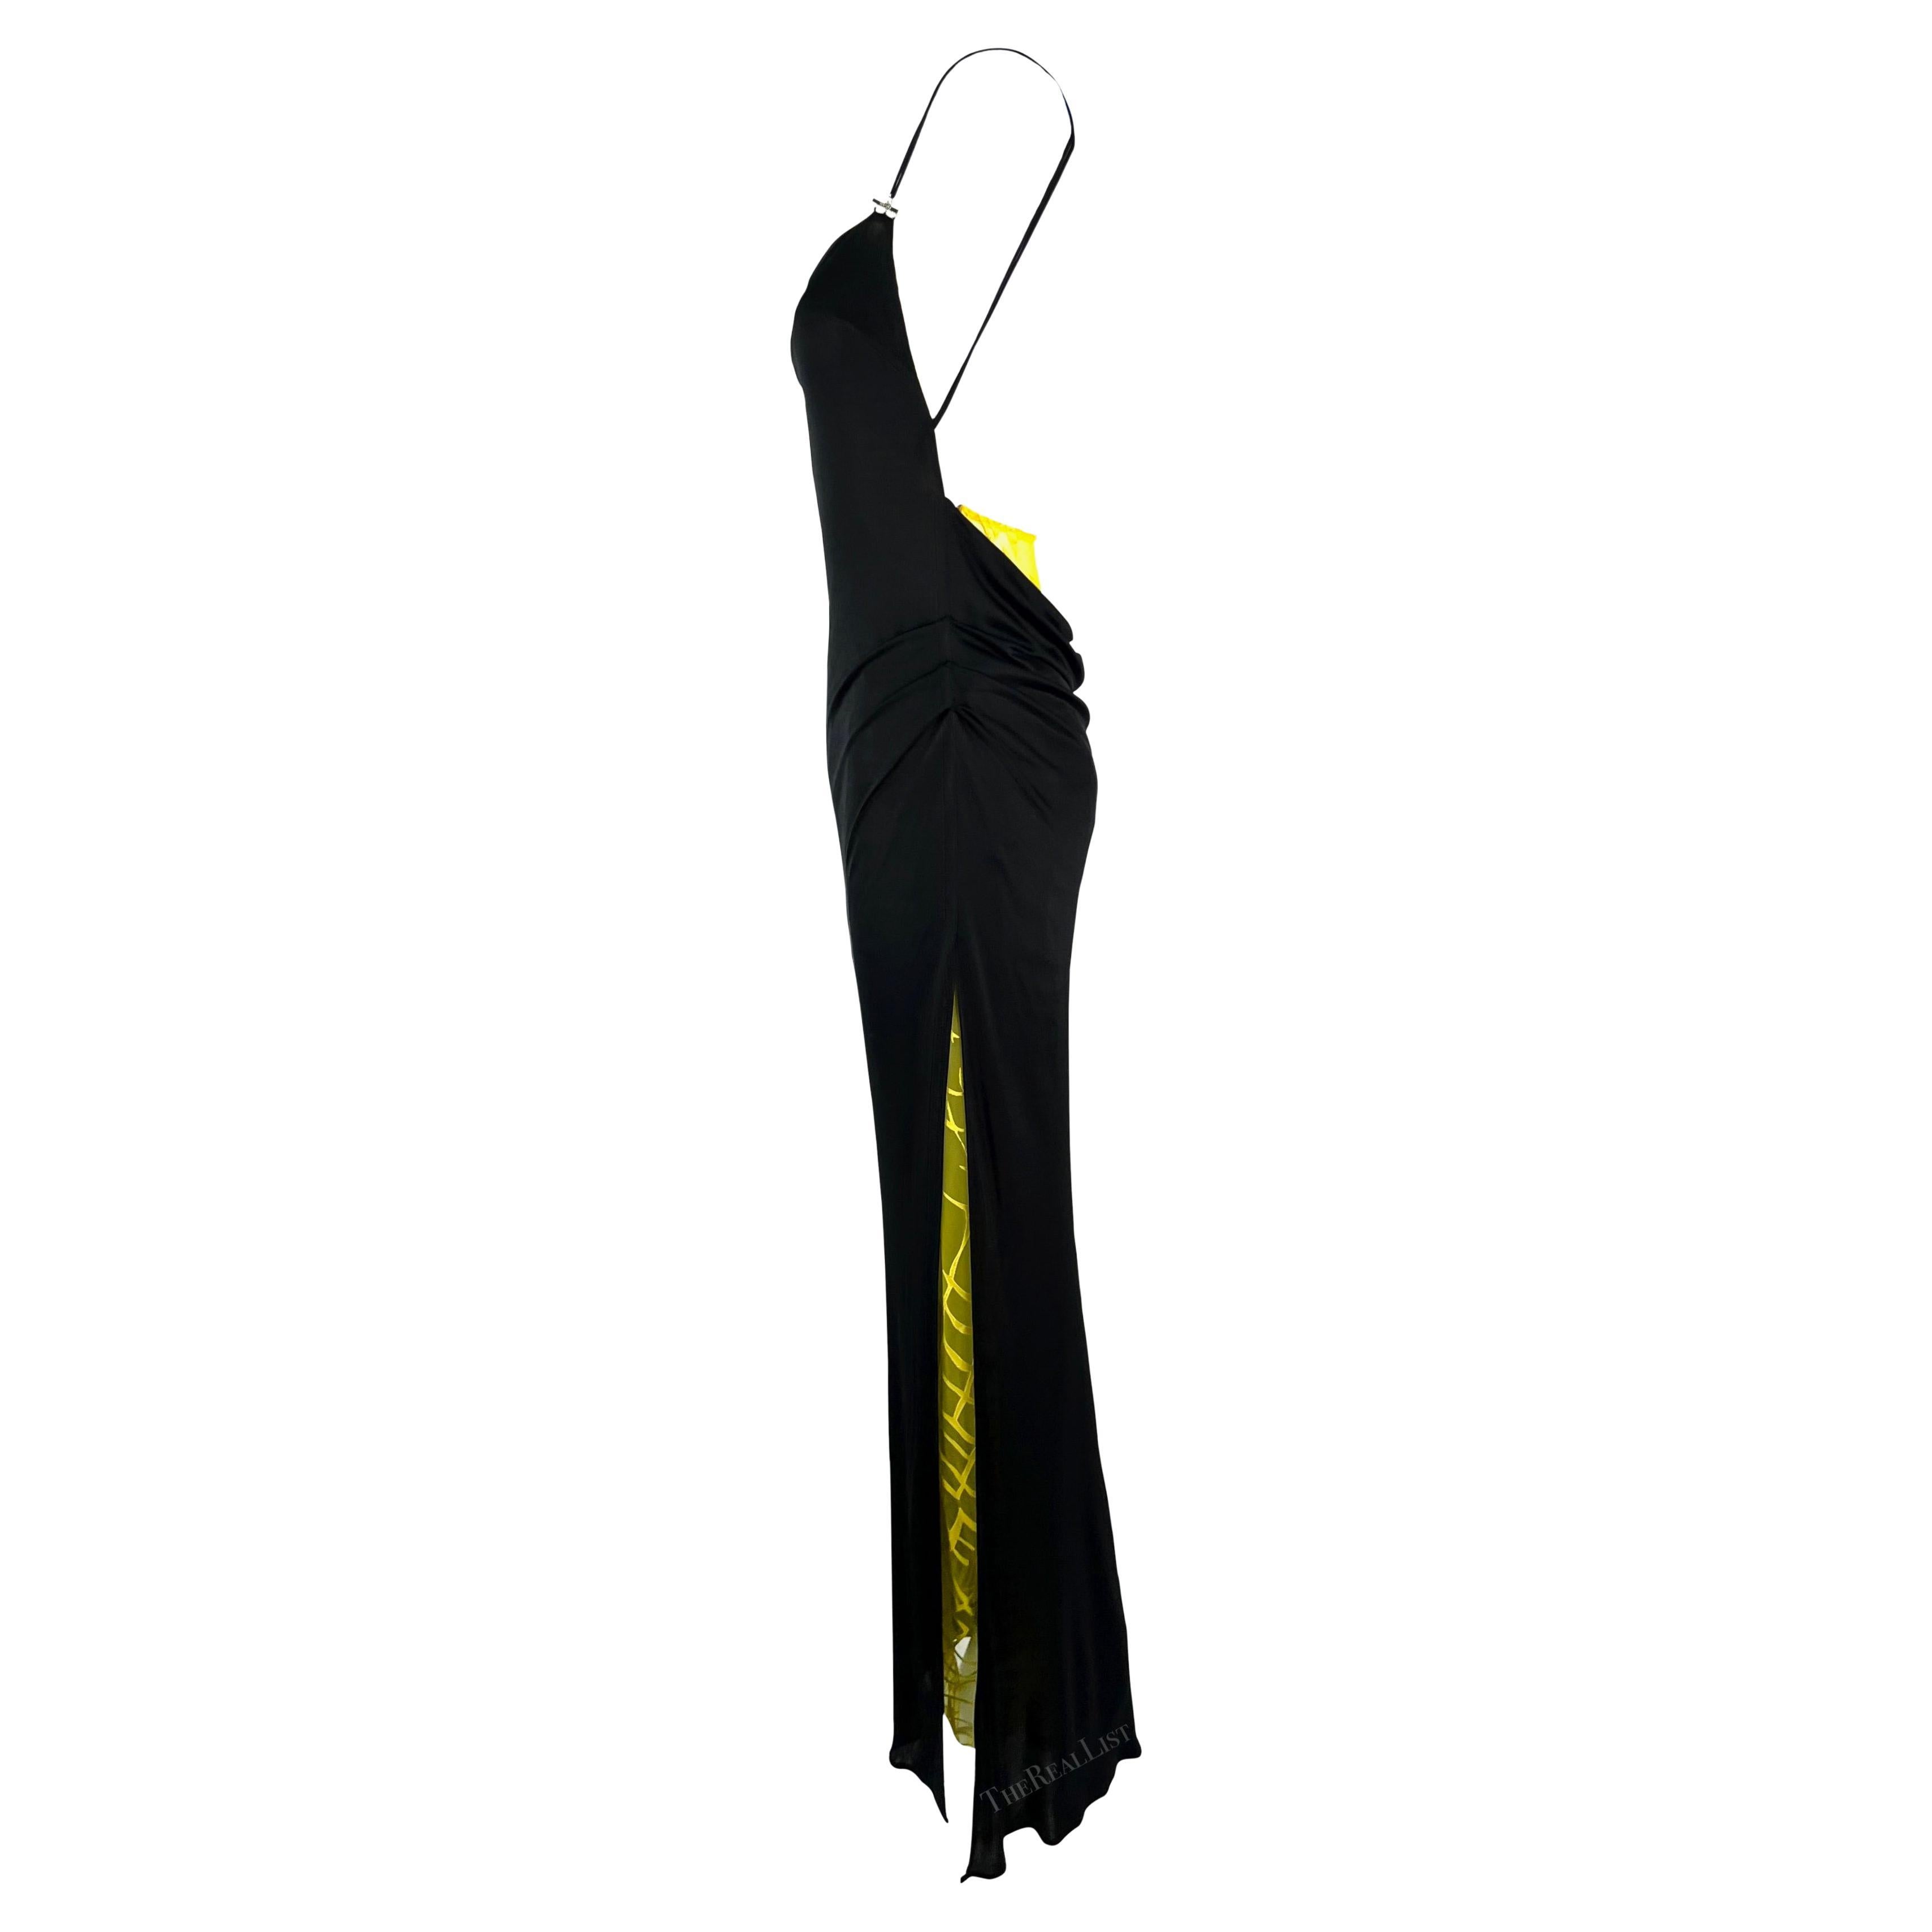 Presenting a fabulous black slip gown by Gianni Versace, designed by Donatella Versace for the Spring/Summer 1999 collection. This gown showcases spaghetti straps adorned with metal hardware accents and an exposed back. At the back, there is also a